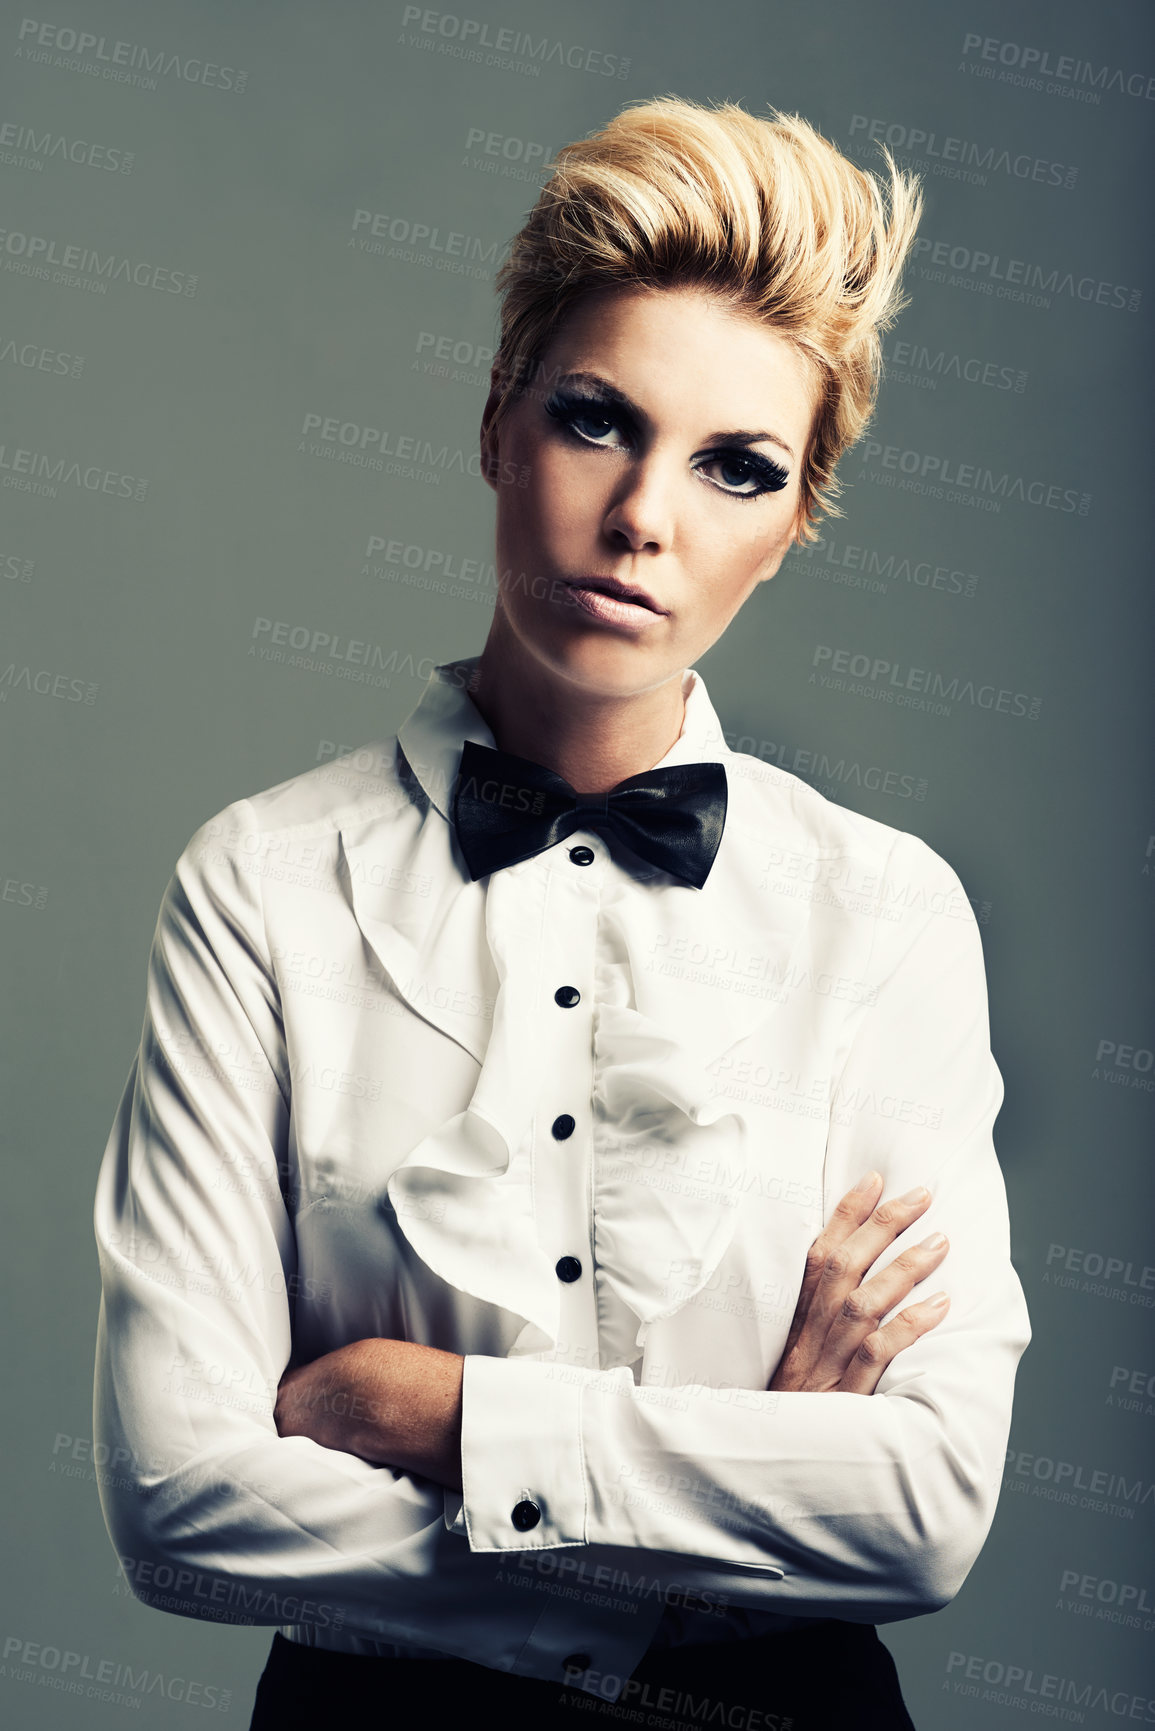 Buy stock photo Portrait, bow tie and woman with fashion, vintage clothes and classy aesthetic on grey background. Arms crossed, edgy fashionable model or cool girl with retro style and makeup isolated in studio